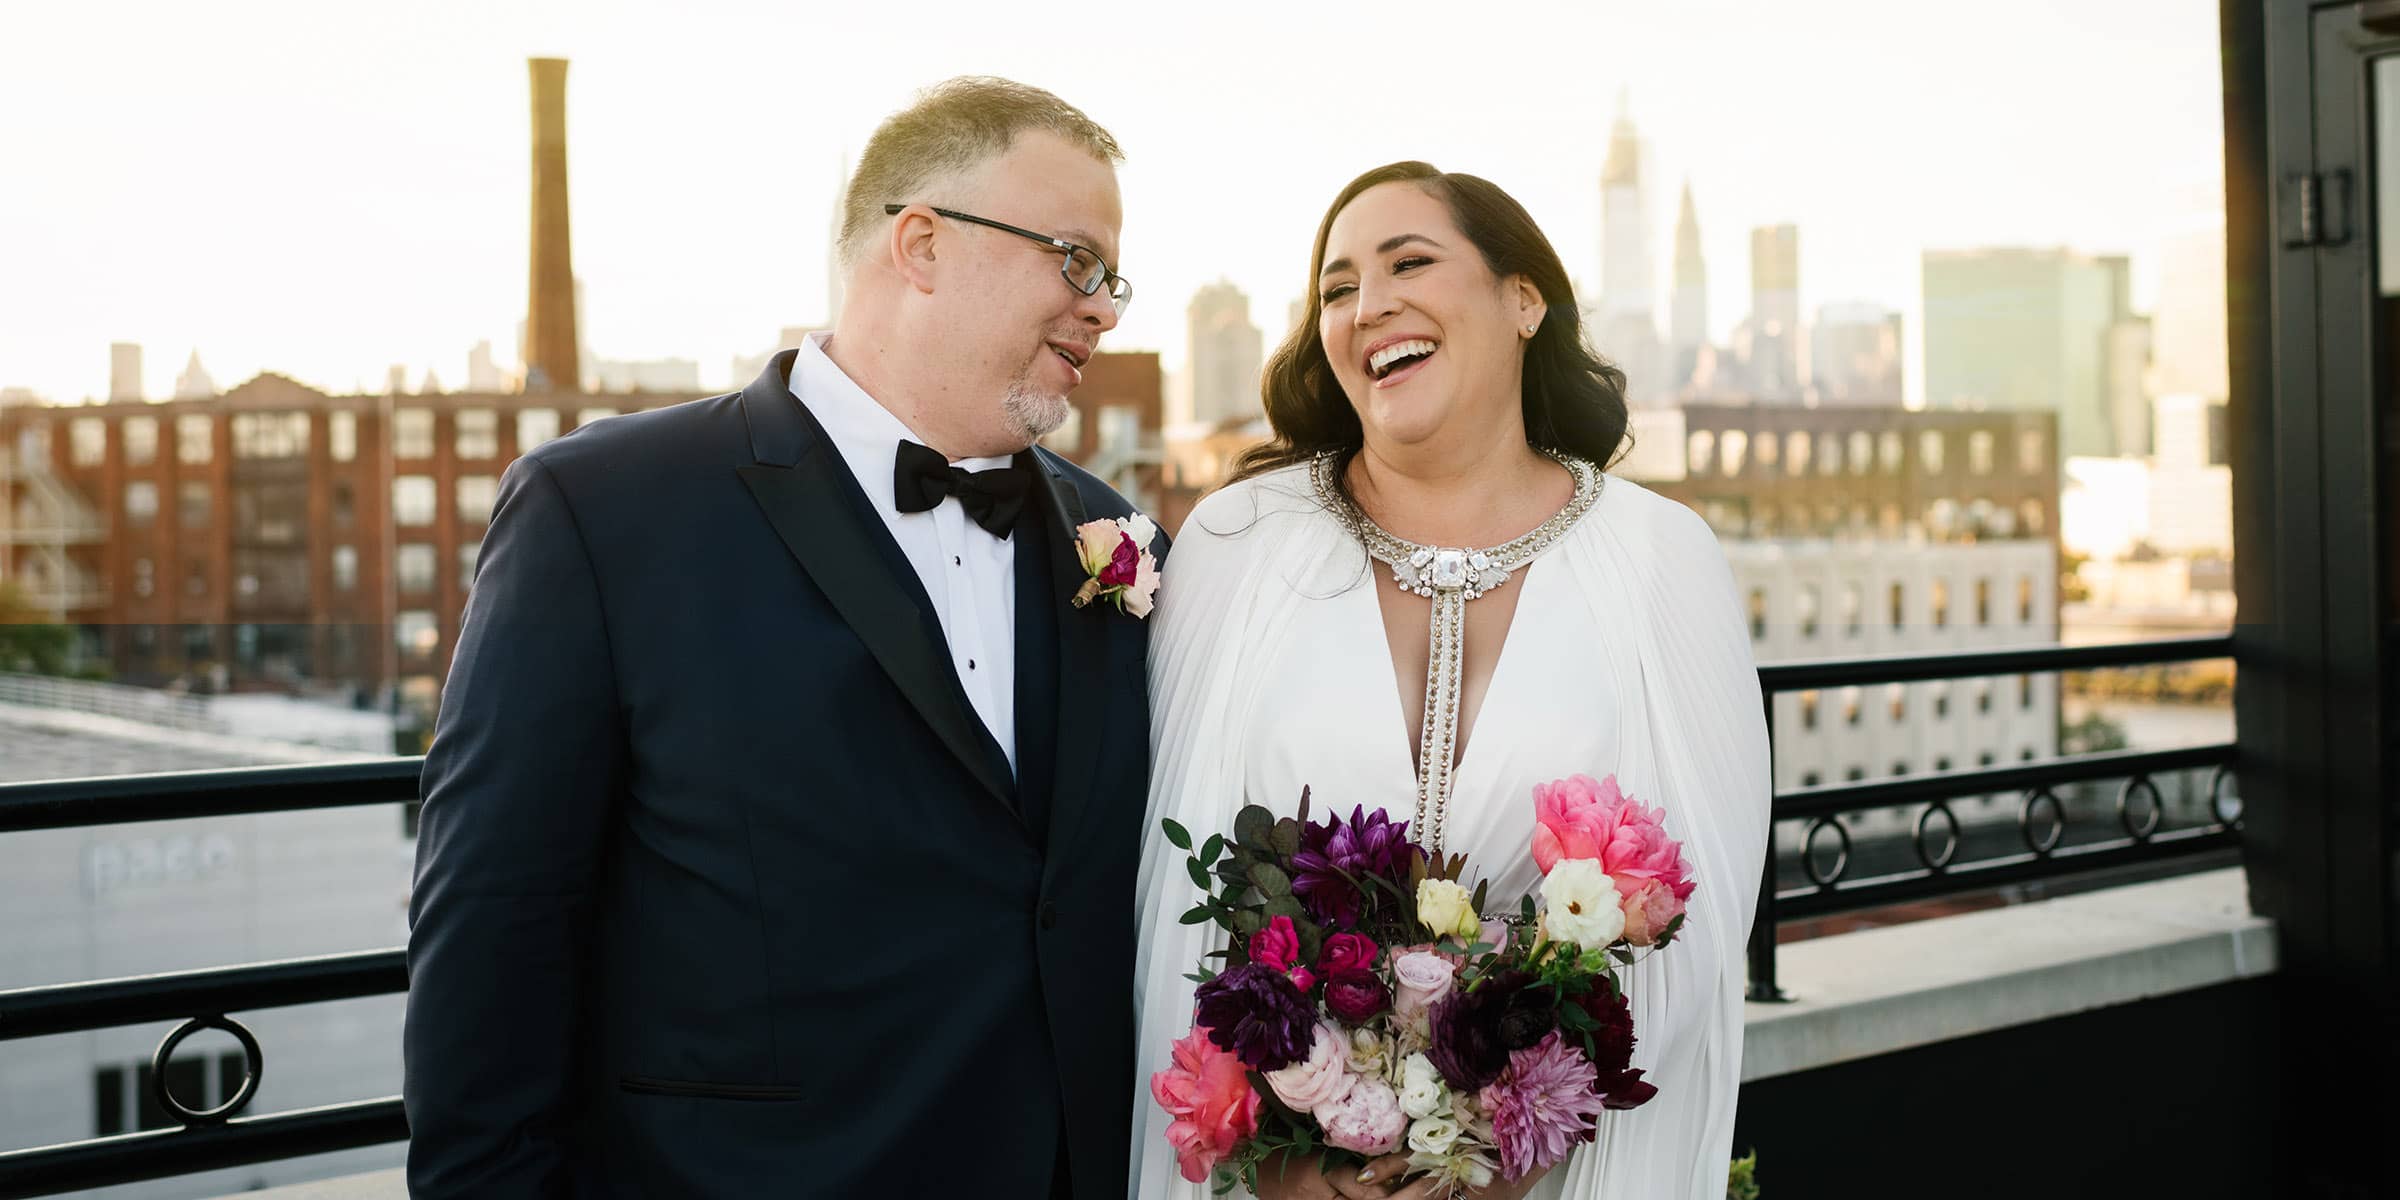 Wedding photography in New York - NYC rooftop wedding at sunset